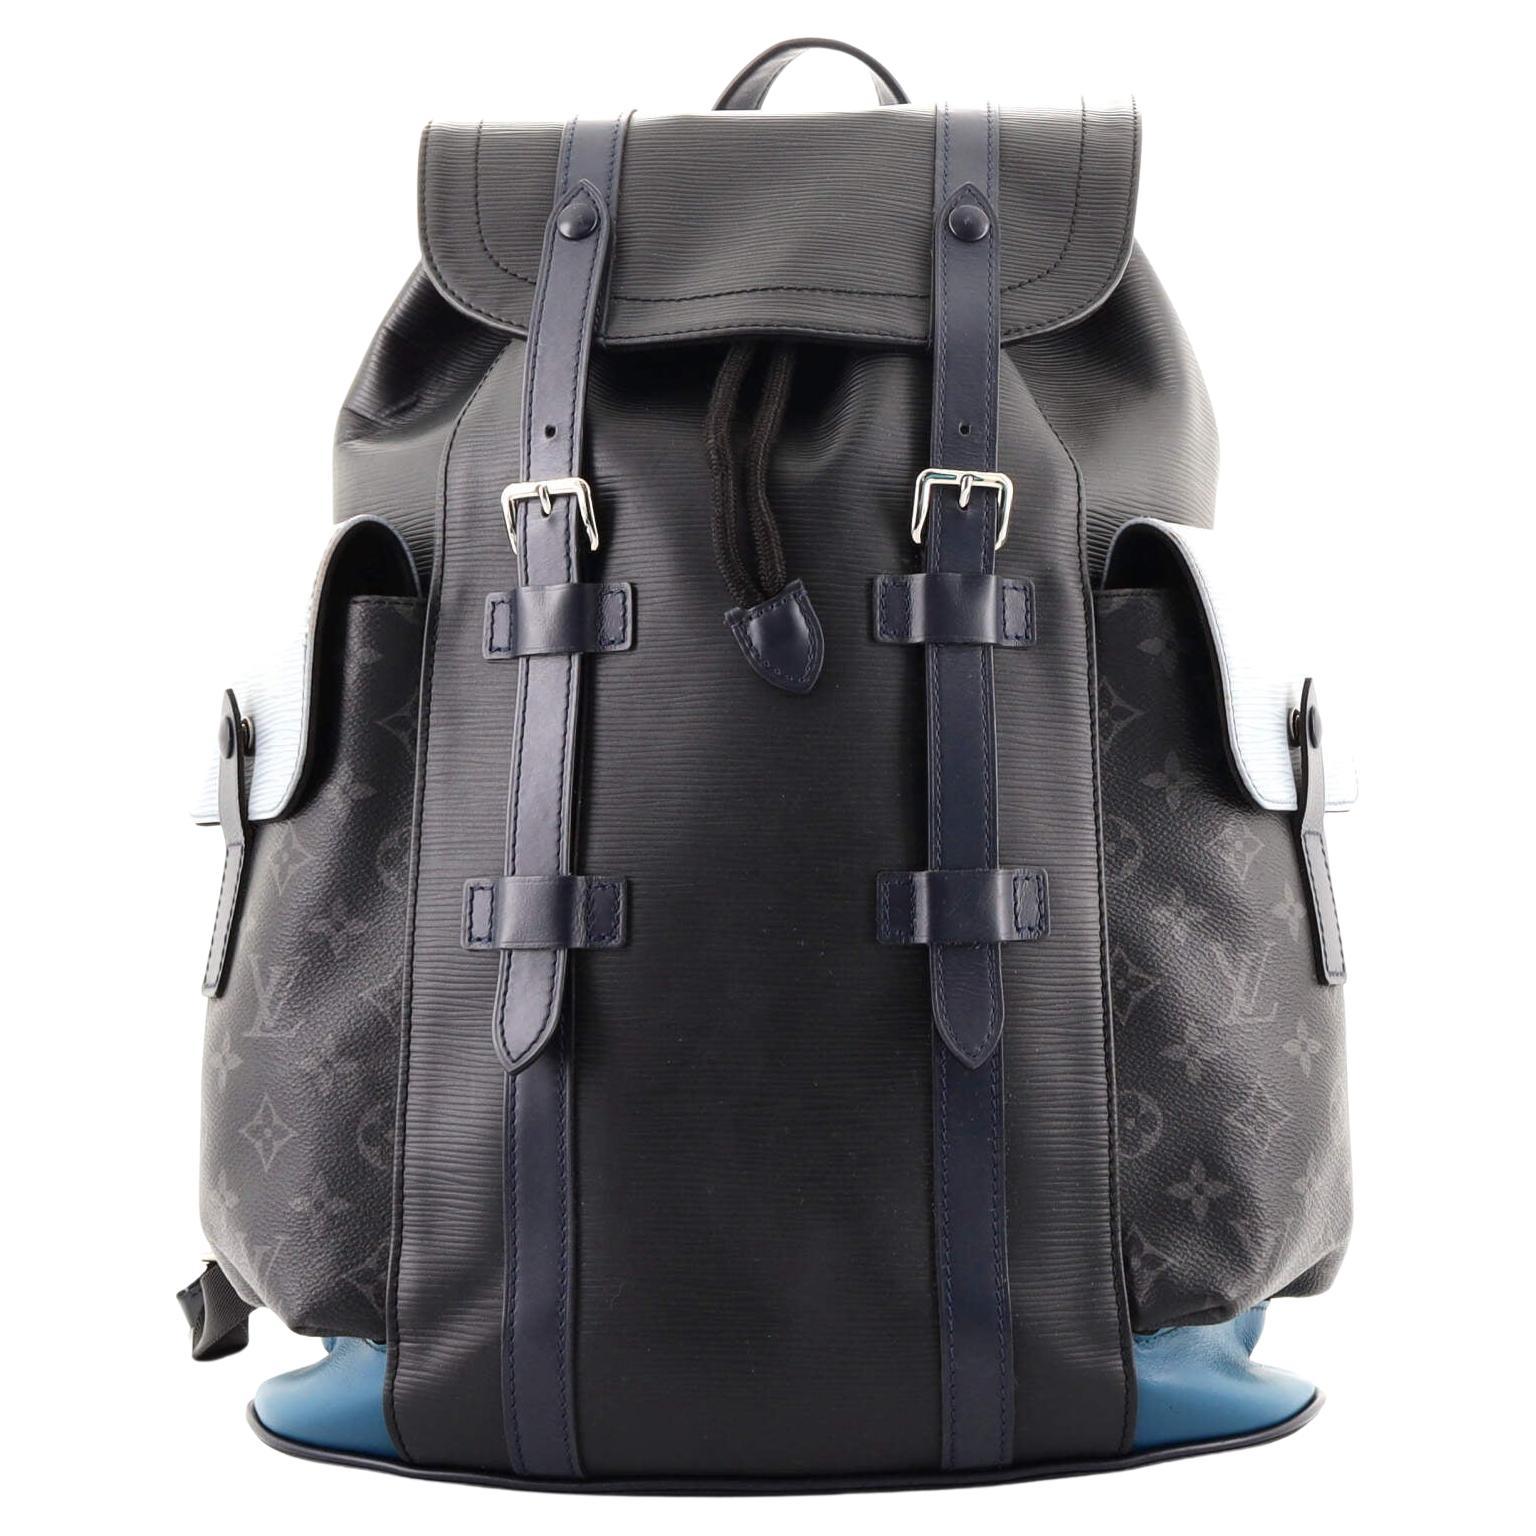 LOUIS VUITTON Christopher Backpack Black Epi Limited Edition